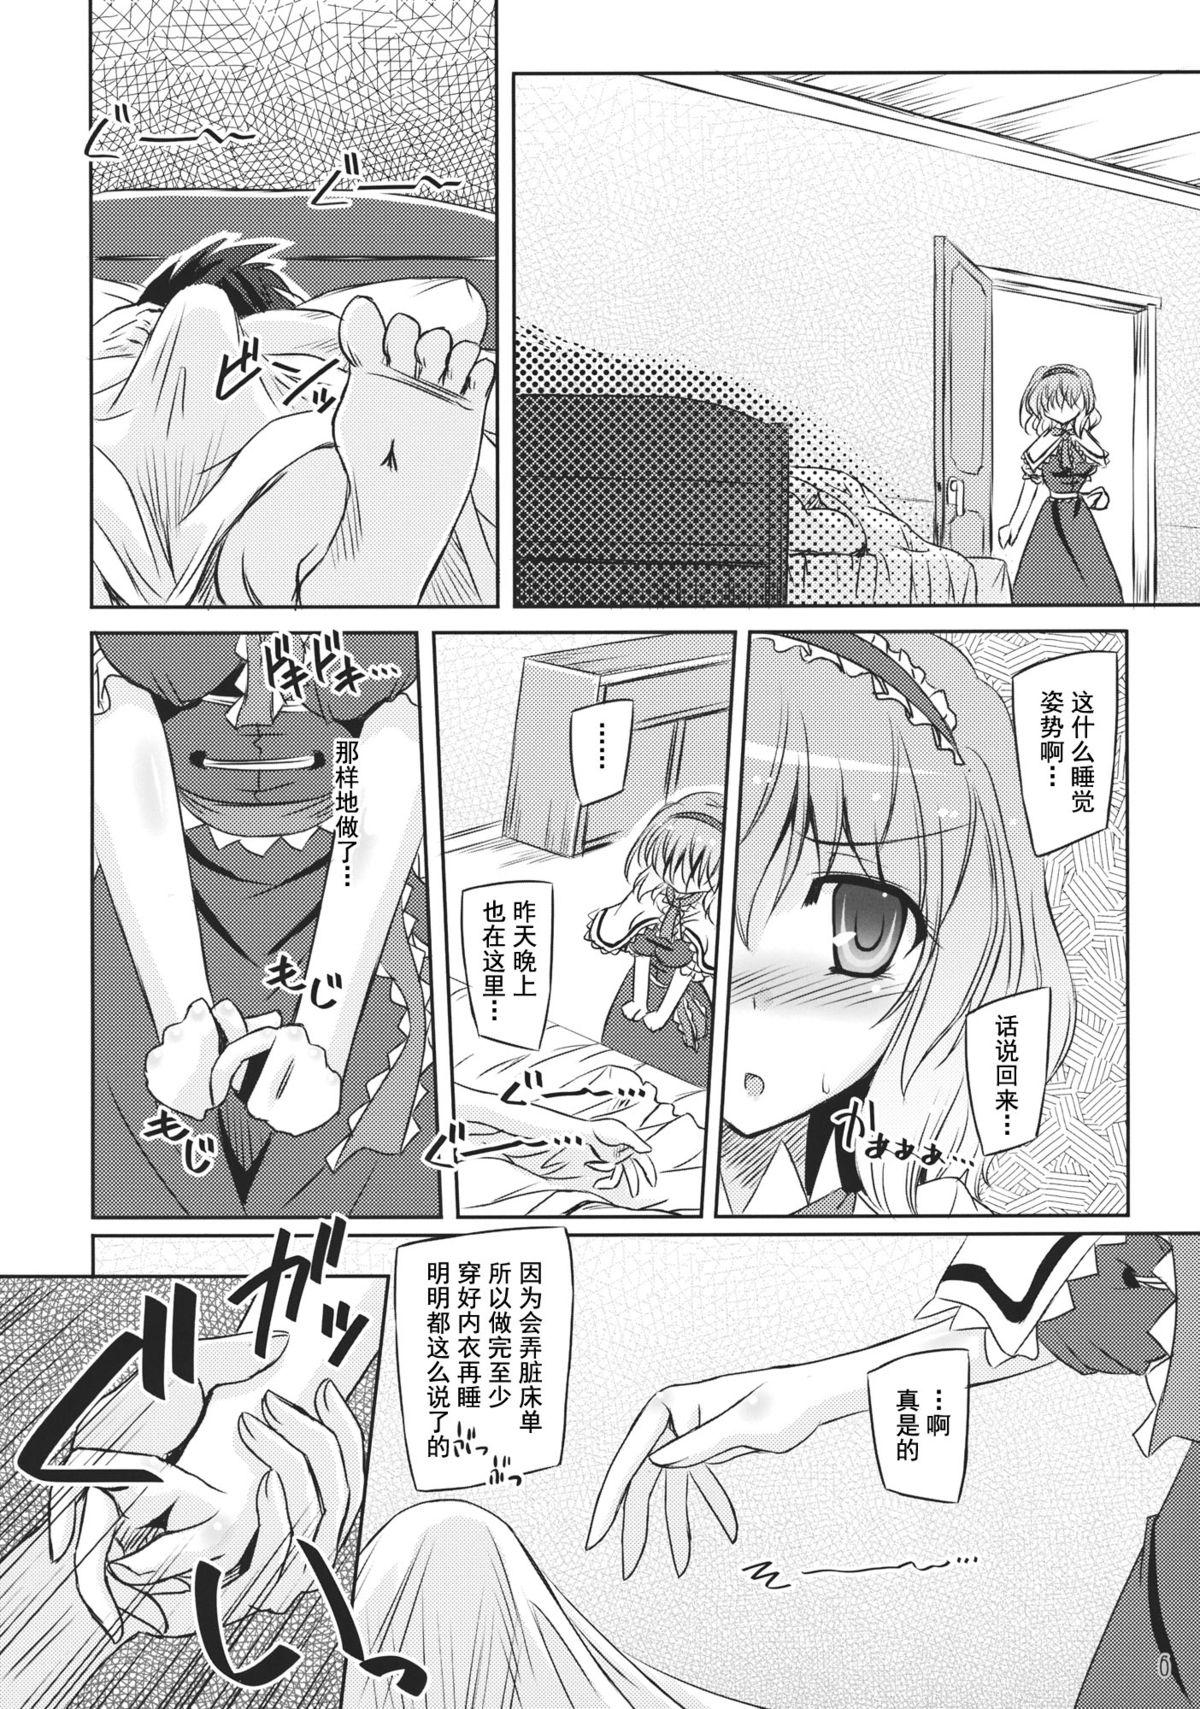 Swallow Loose Strings - Touhou project Mofos - Page 6